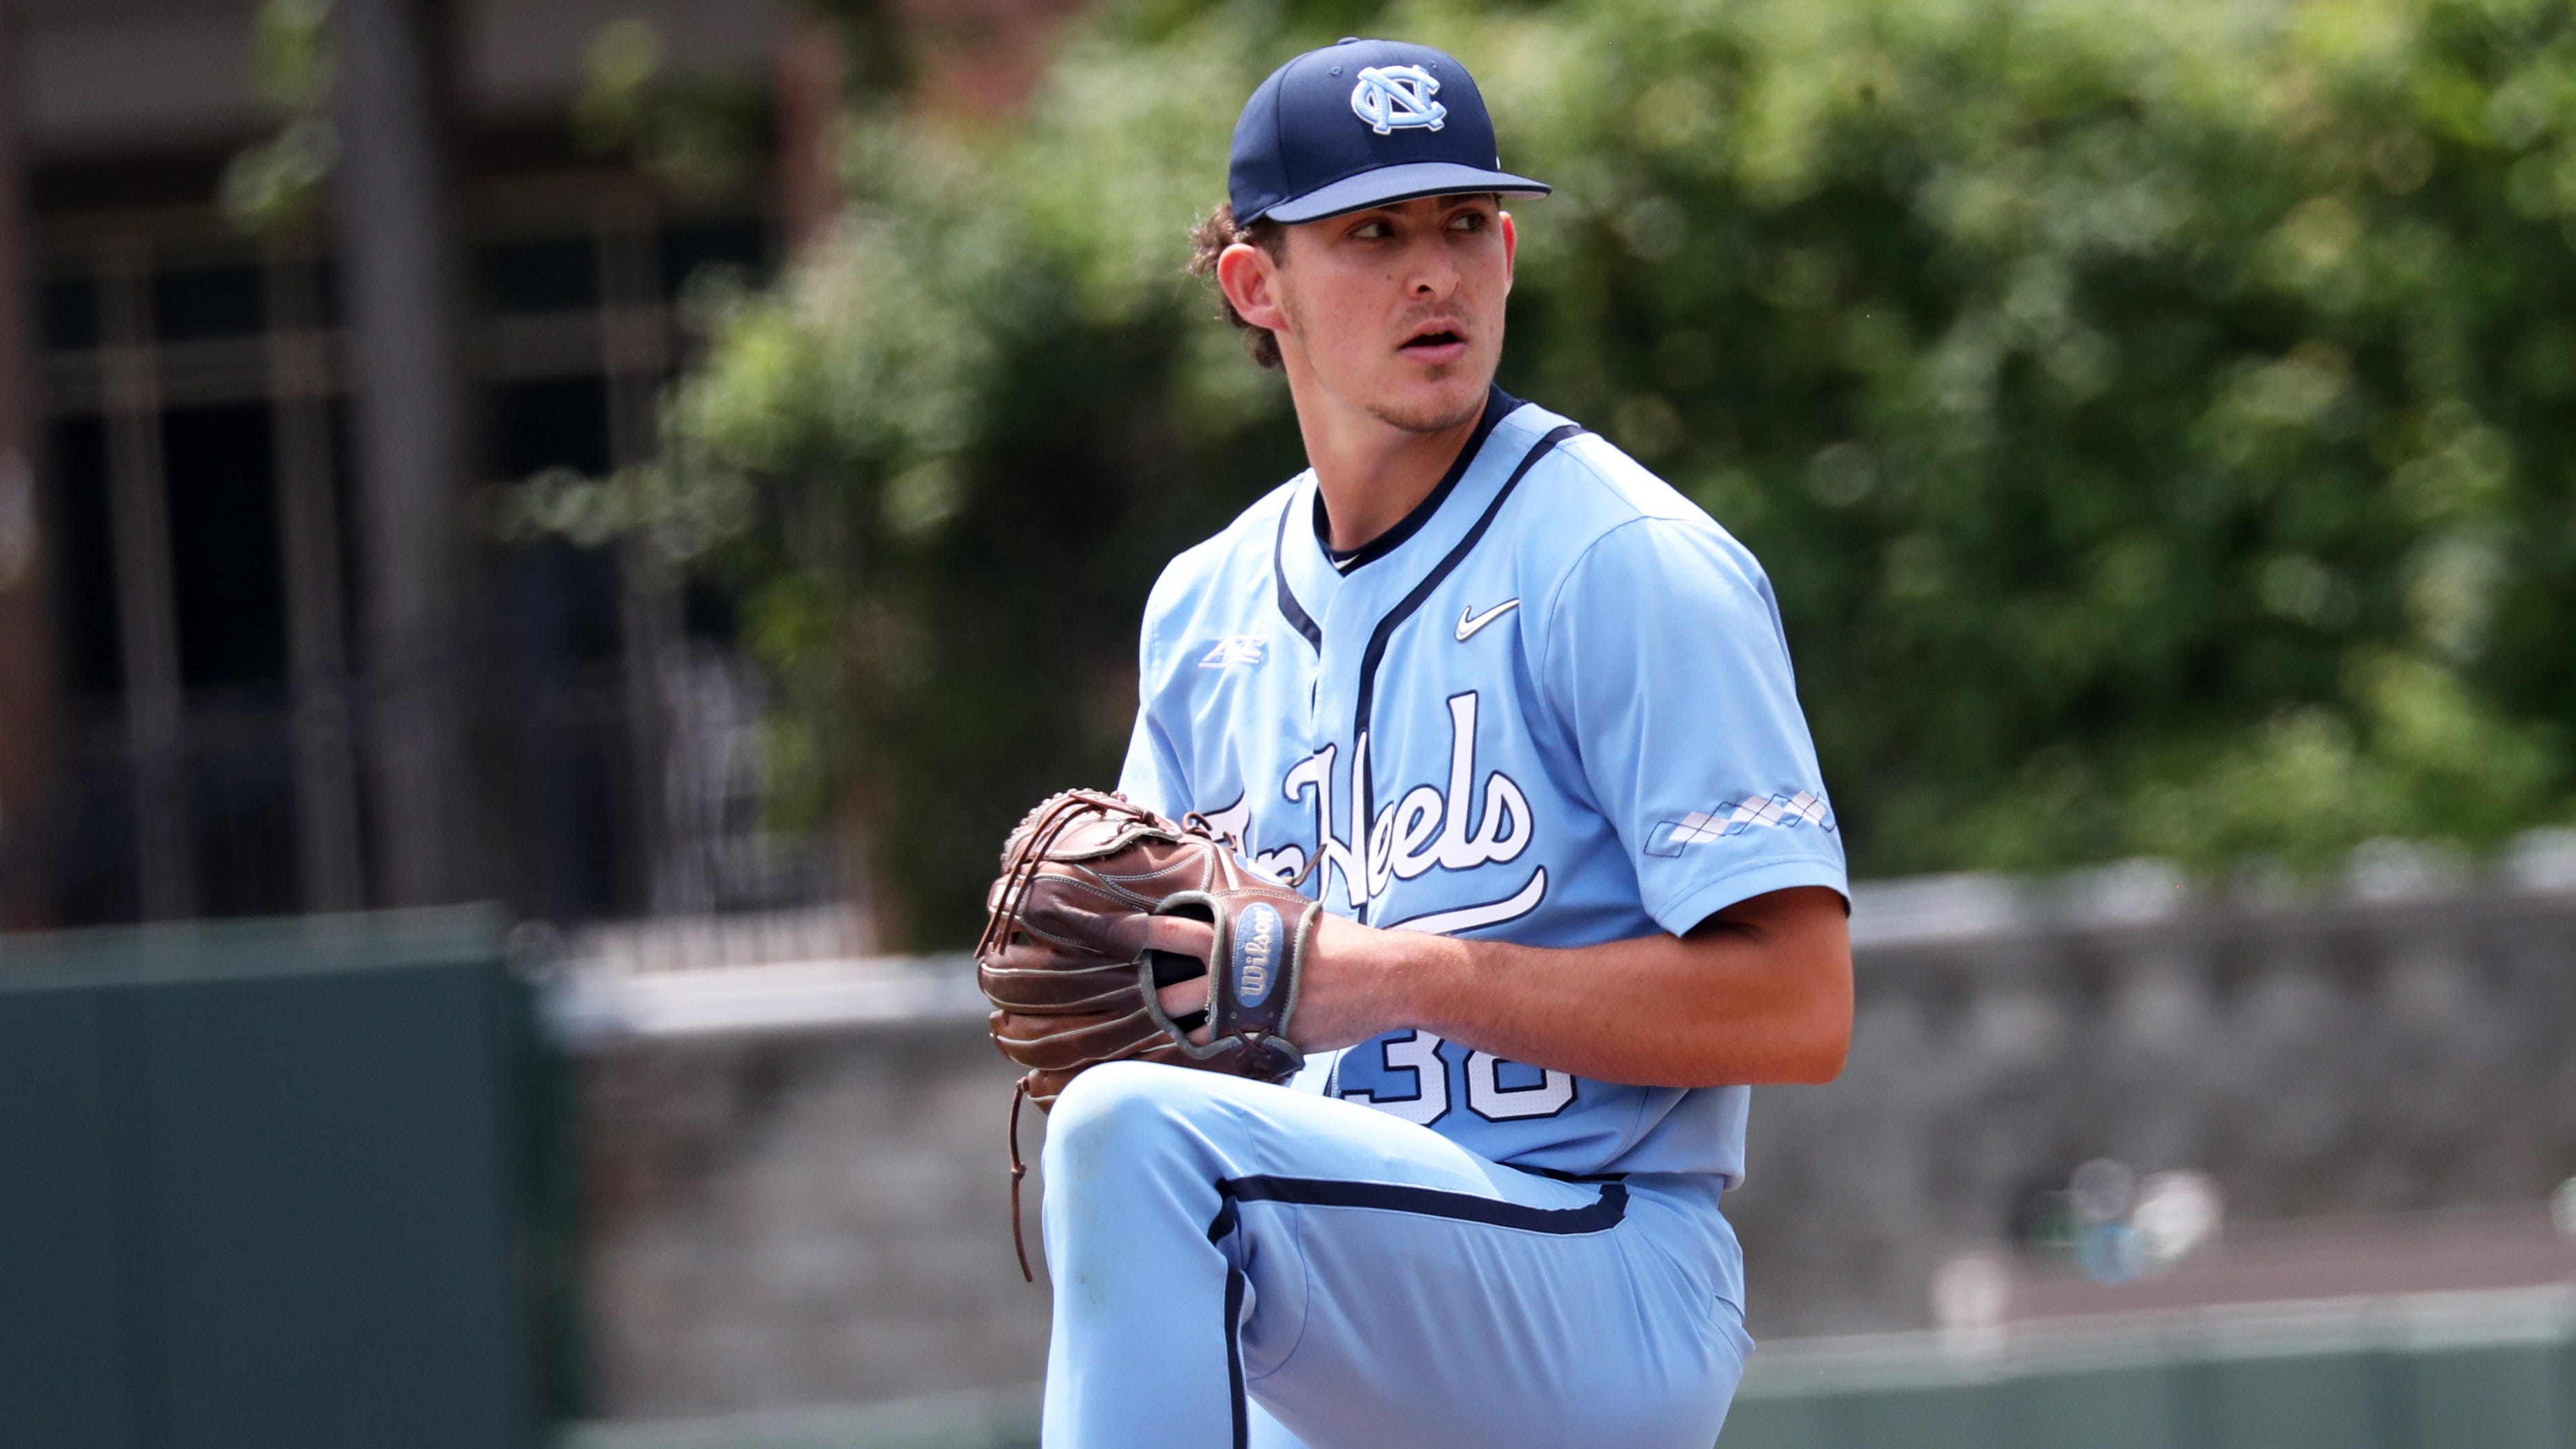 UNC Baseball commit Brooks Brannon selected by Boston Red Sox in MLB Draft  - Tar Heel Times - 7/19/2022